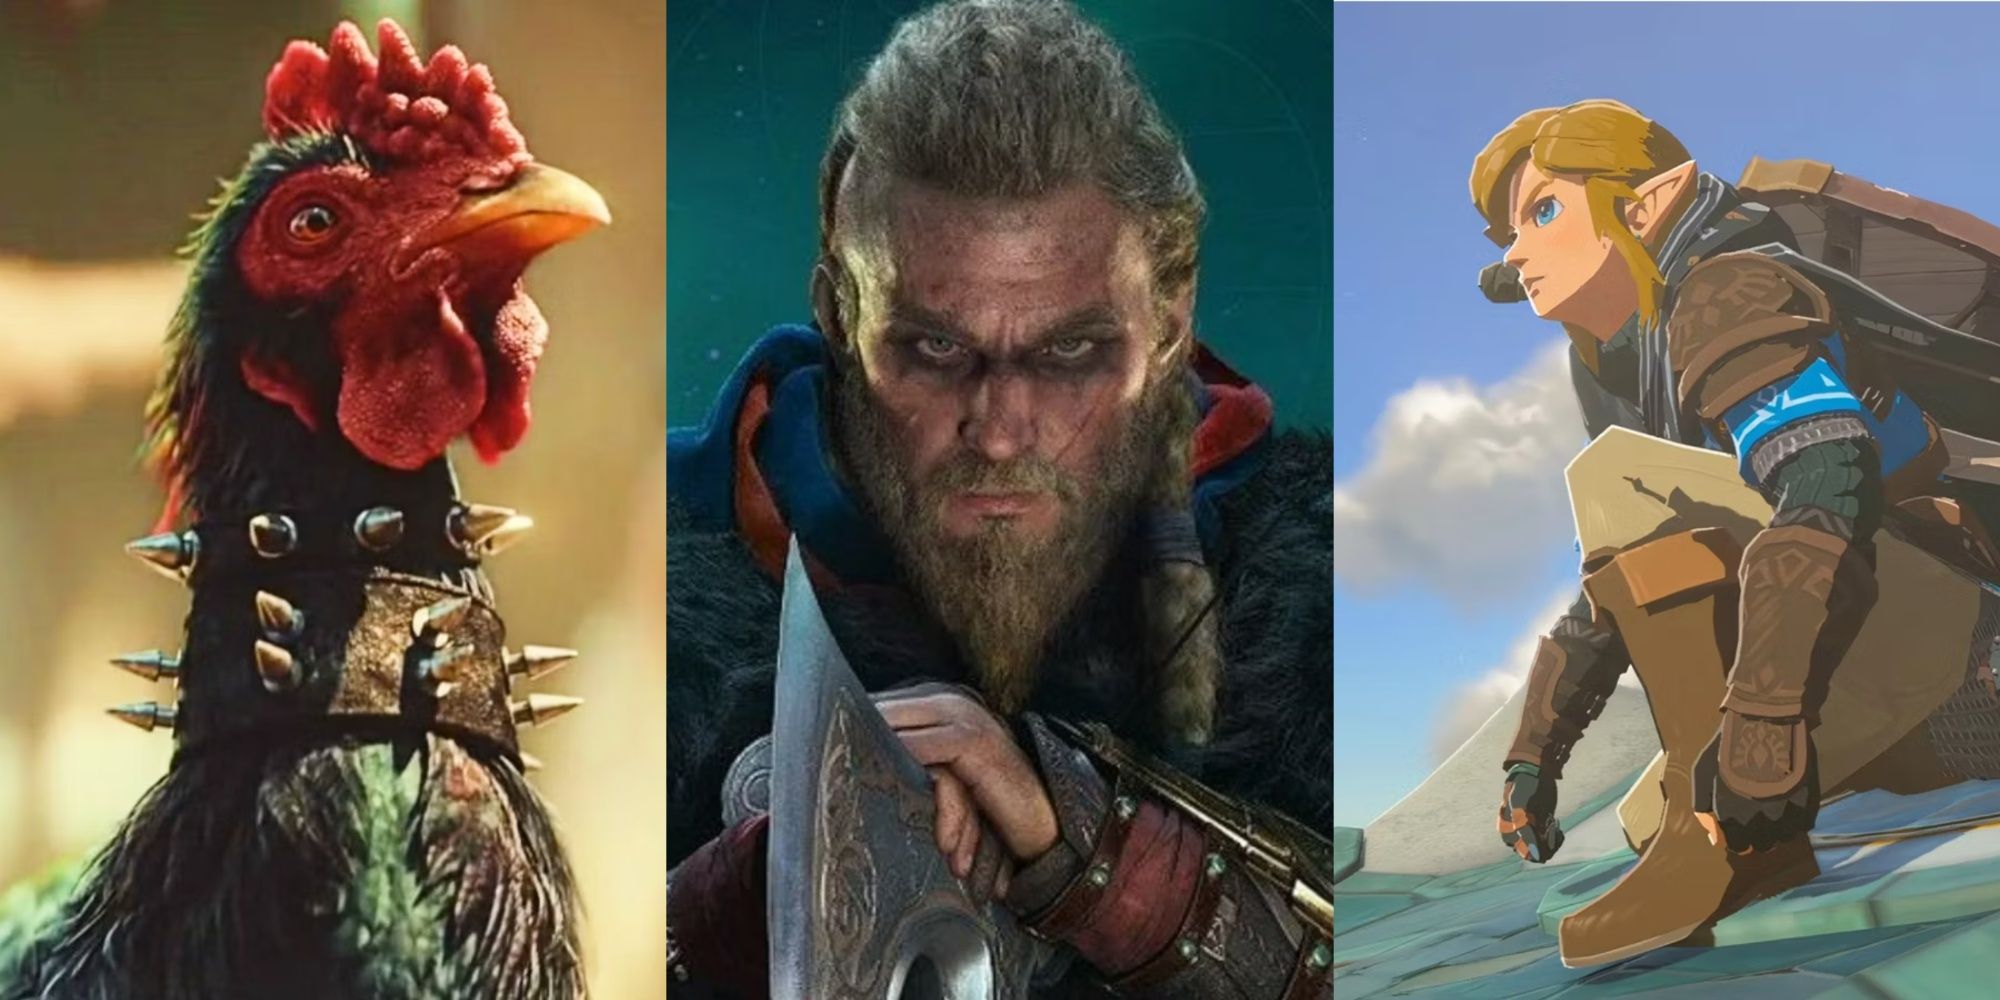 Feature image of FaryCry 6 Chicken, Evior and Link 